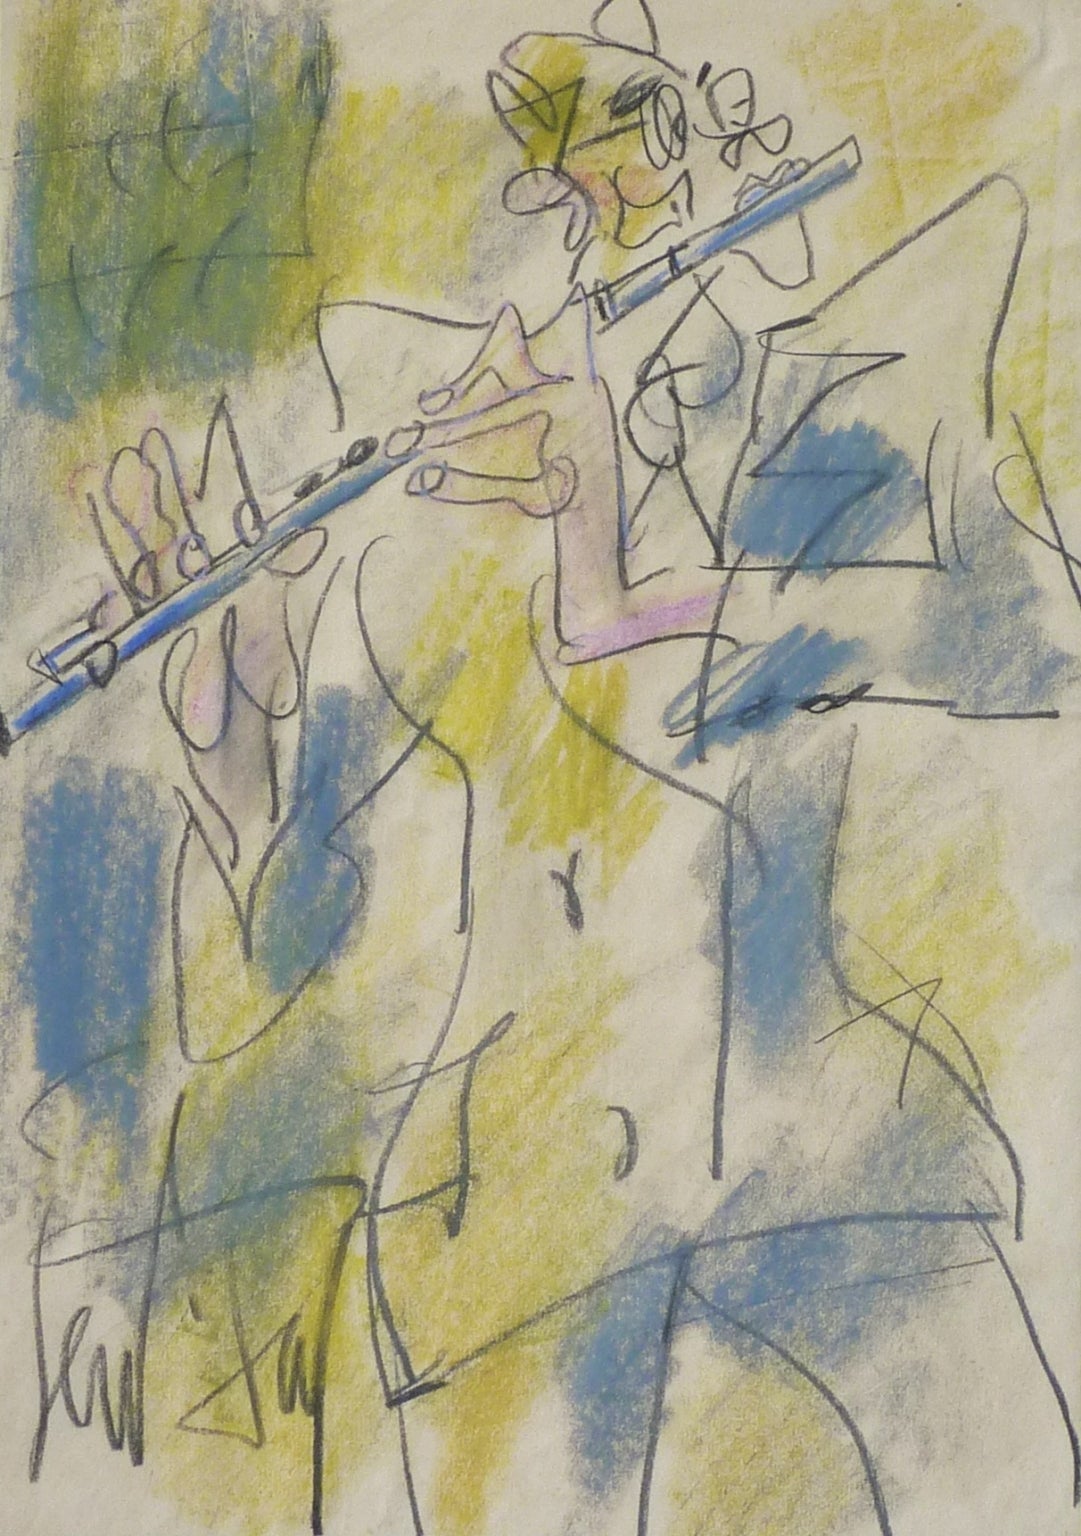 The Flutist, The Musician - Expressionist Art by GEN PAUL